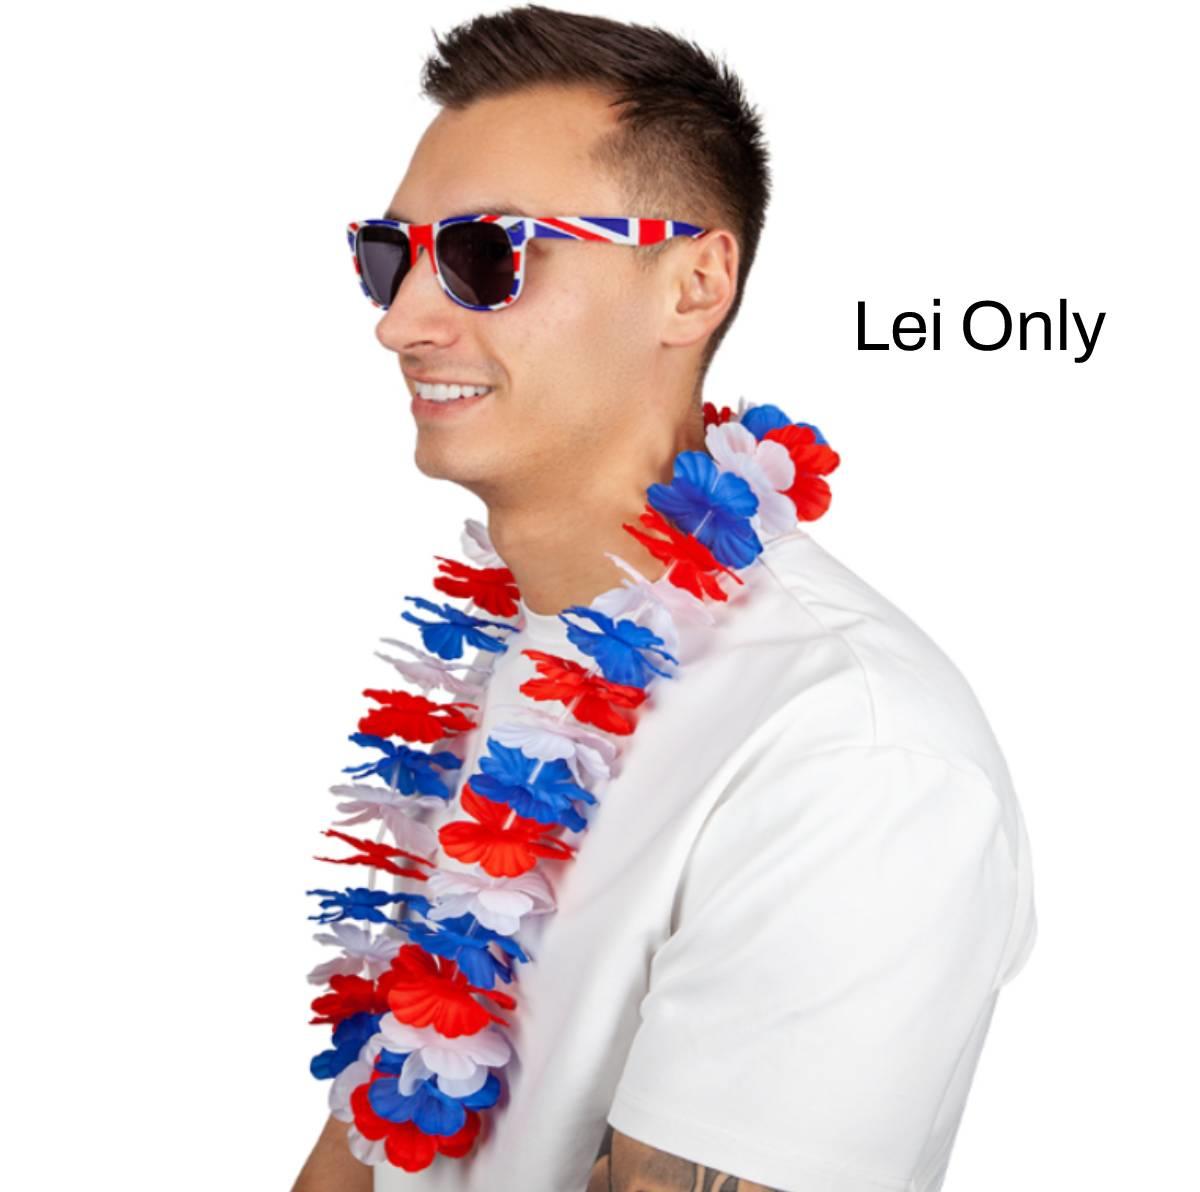 Wicked Costumes G.B Red WHite & Blue Hawaiian Leii Garland Accessories 4pc Set 